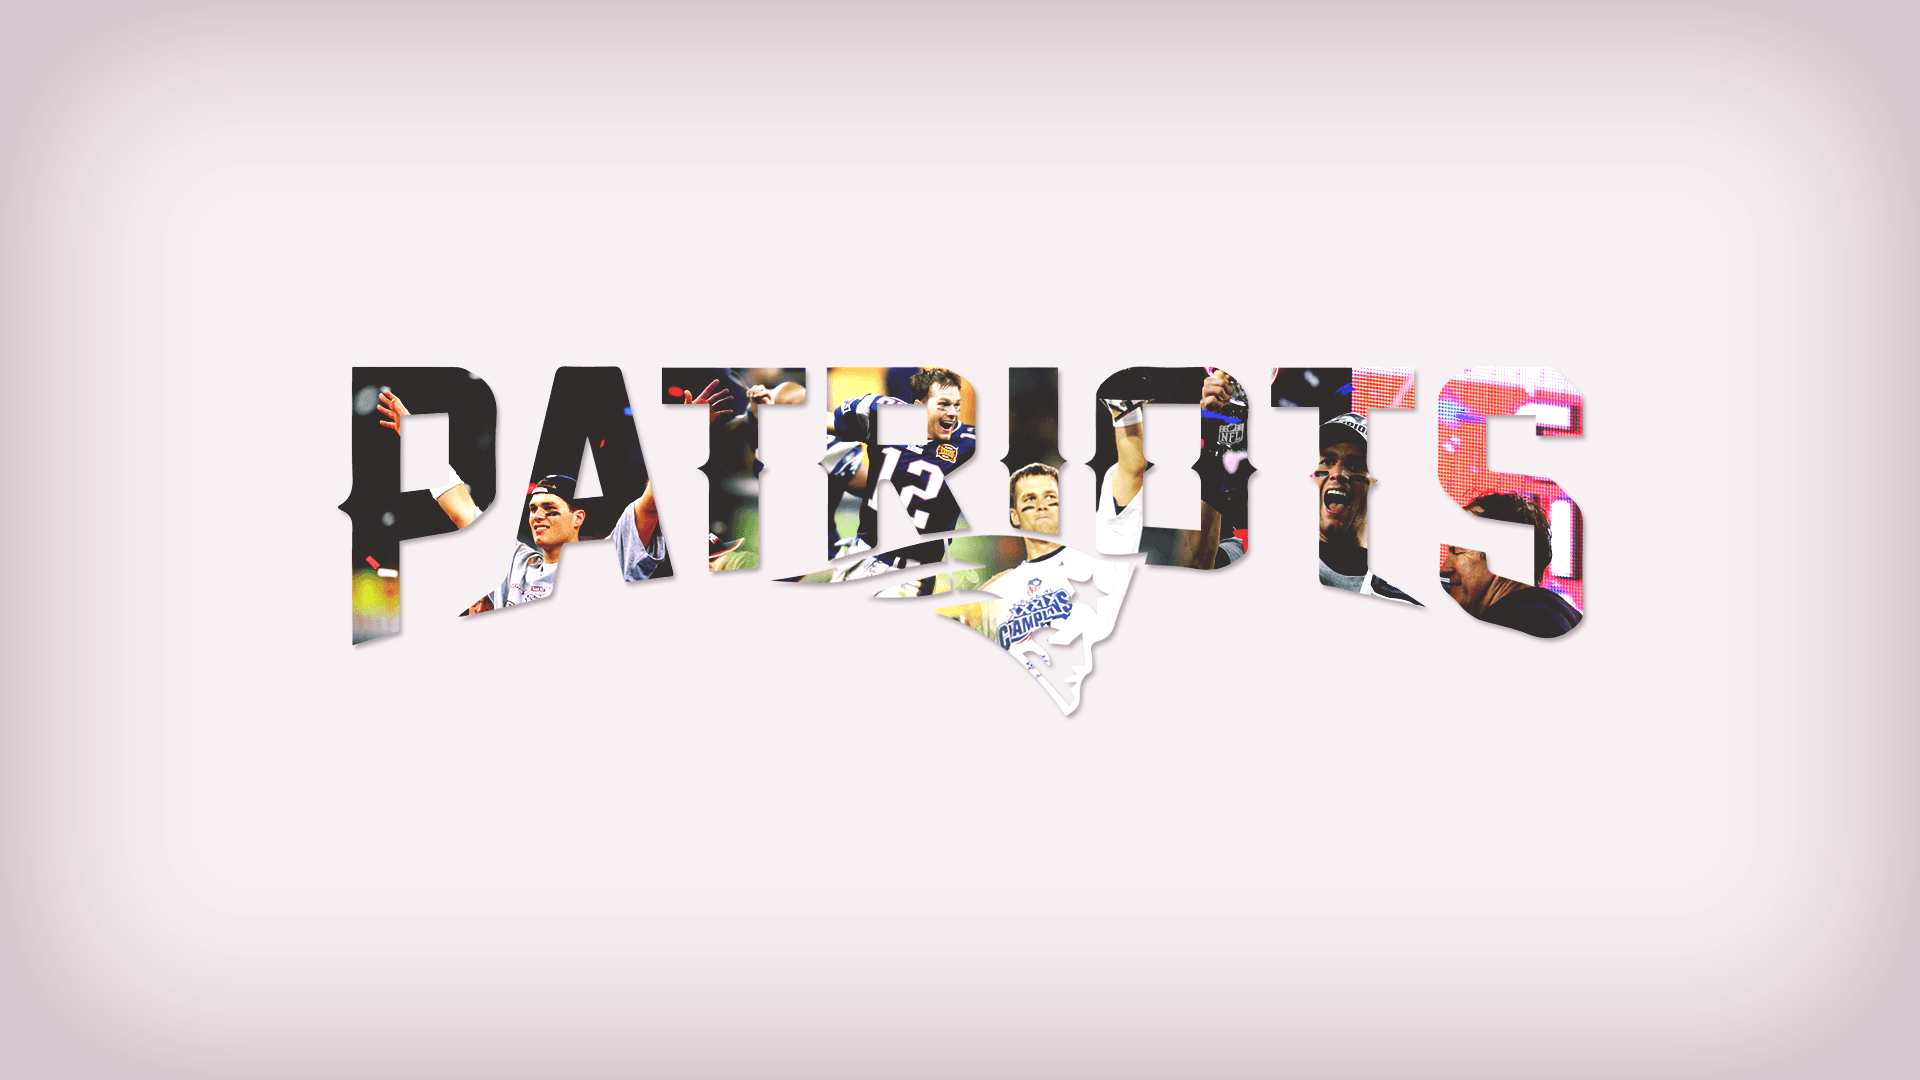 Awesome New England Patriots wallpaper!